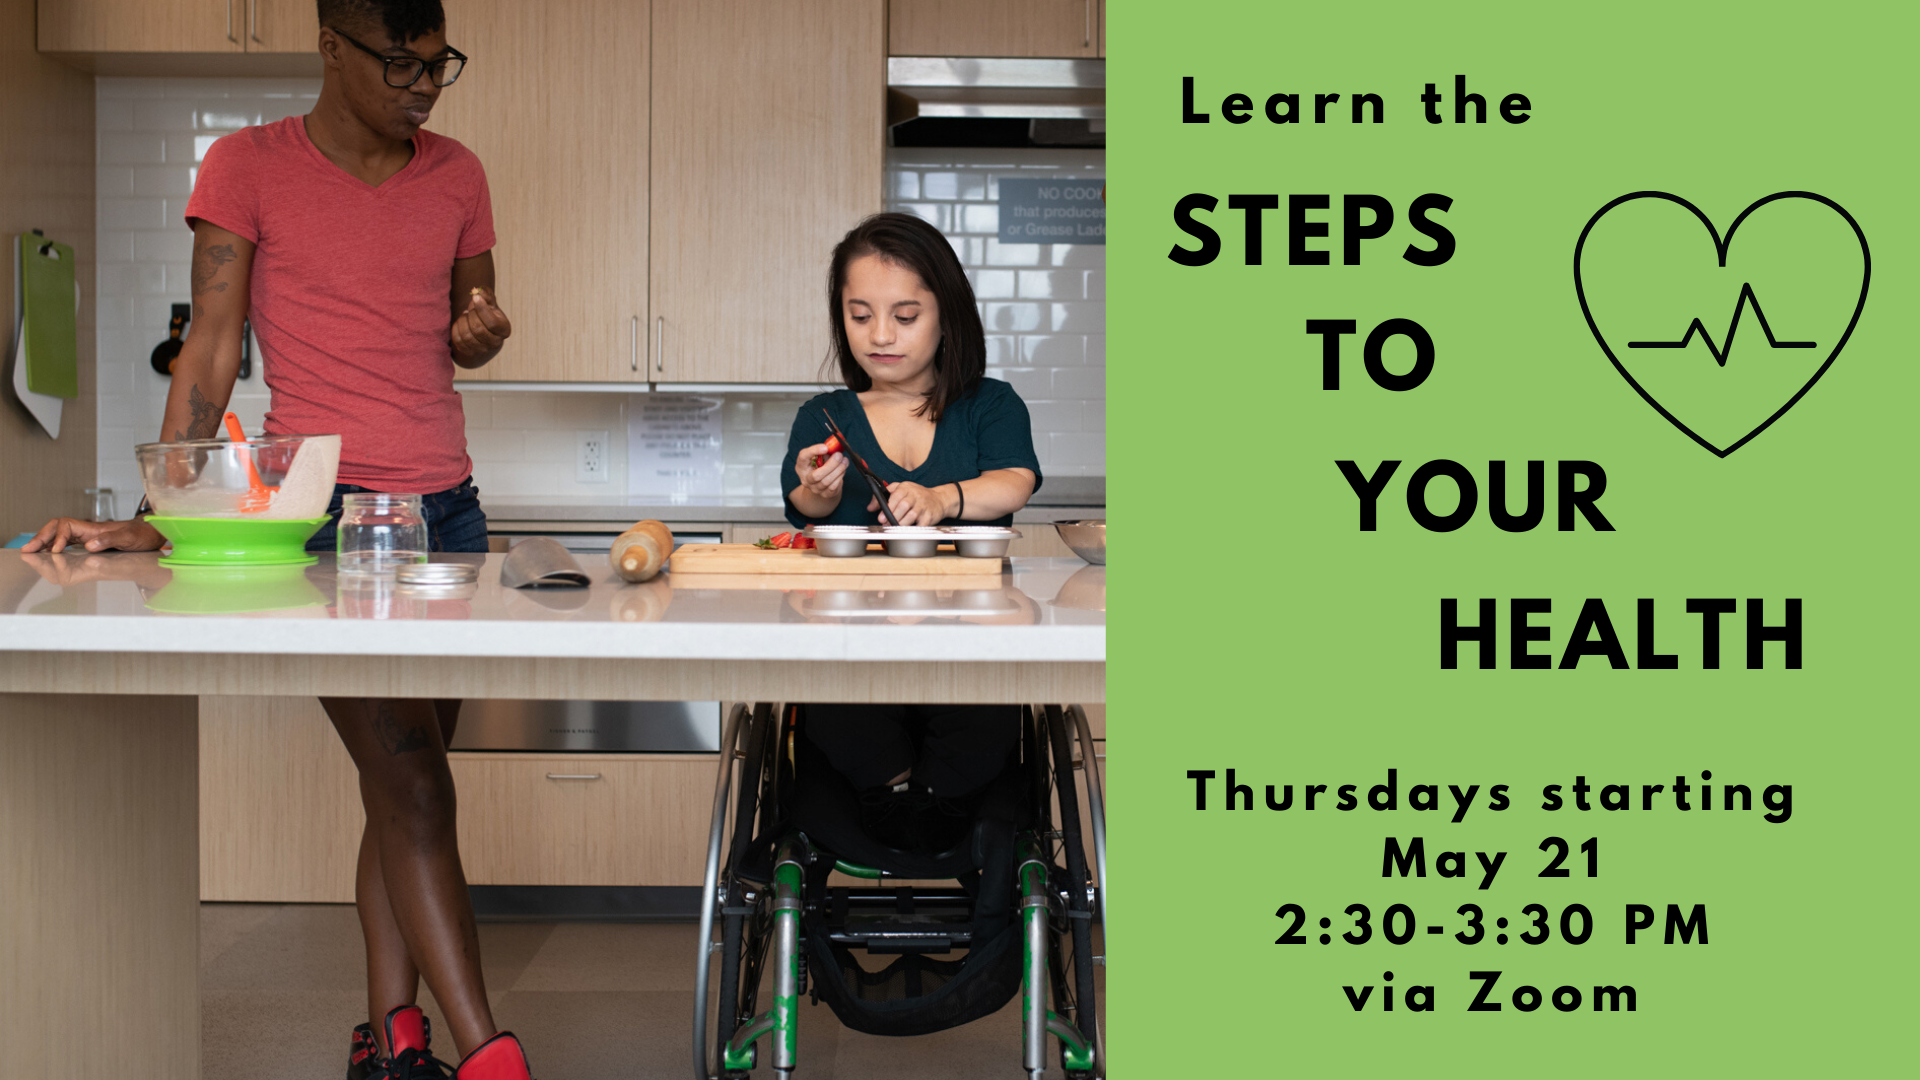 Three disabled people of color (a Black non-binary person on the left, a South Asian person with a wheelchair in the middle, and a Black woman on the right) at a kitchen counter with open space underneath. The person in the middle chops strawberries while the other samples a strawberry. To the right, black text on a green square says 